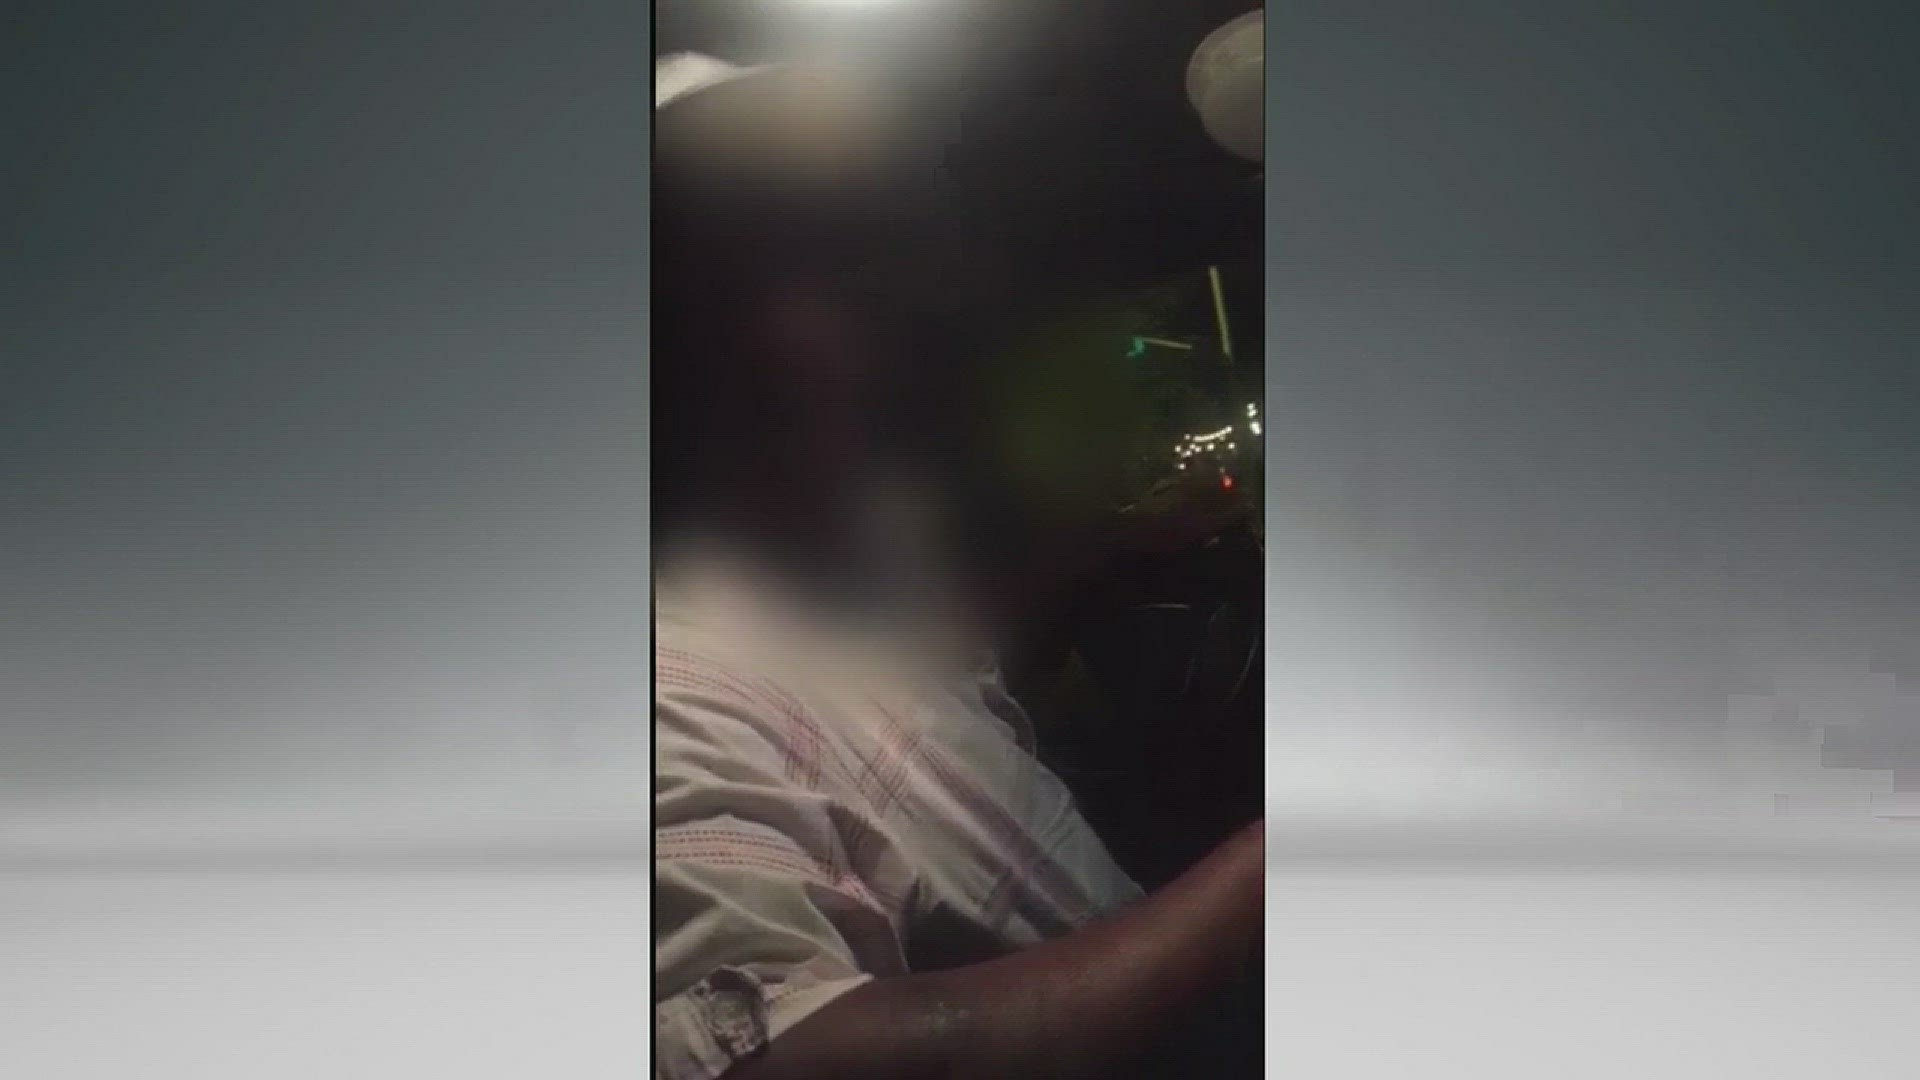 Viral video of cab driver kicking passengers out of car. The driver's face has been blurred and expletives have been bleeped out.